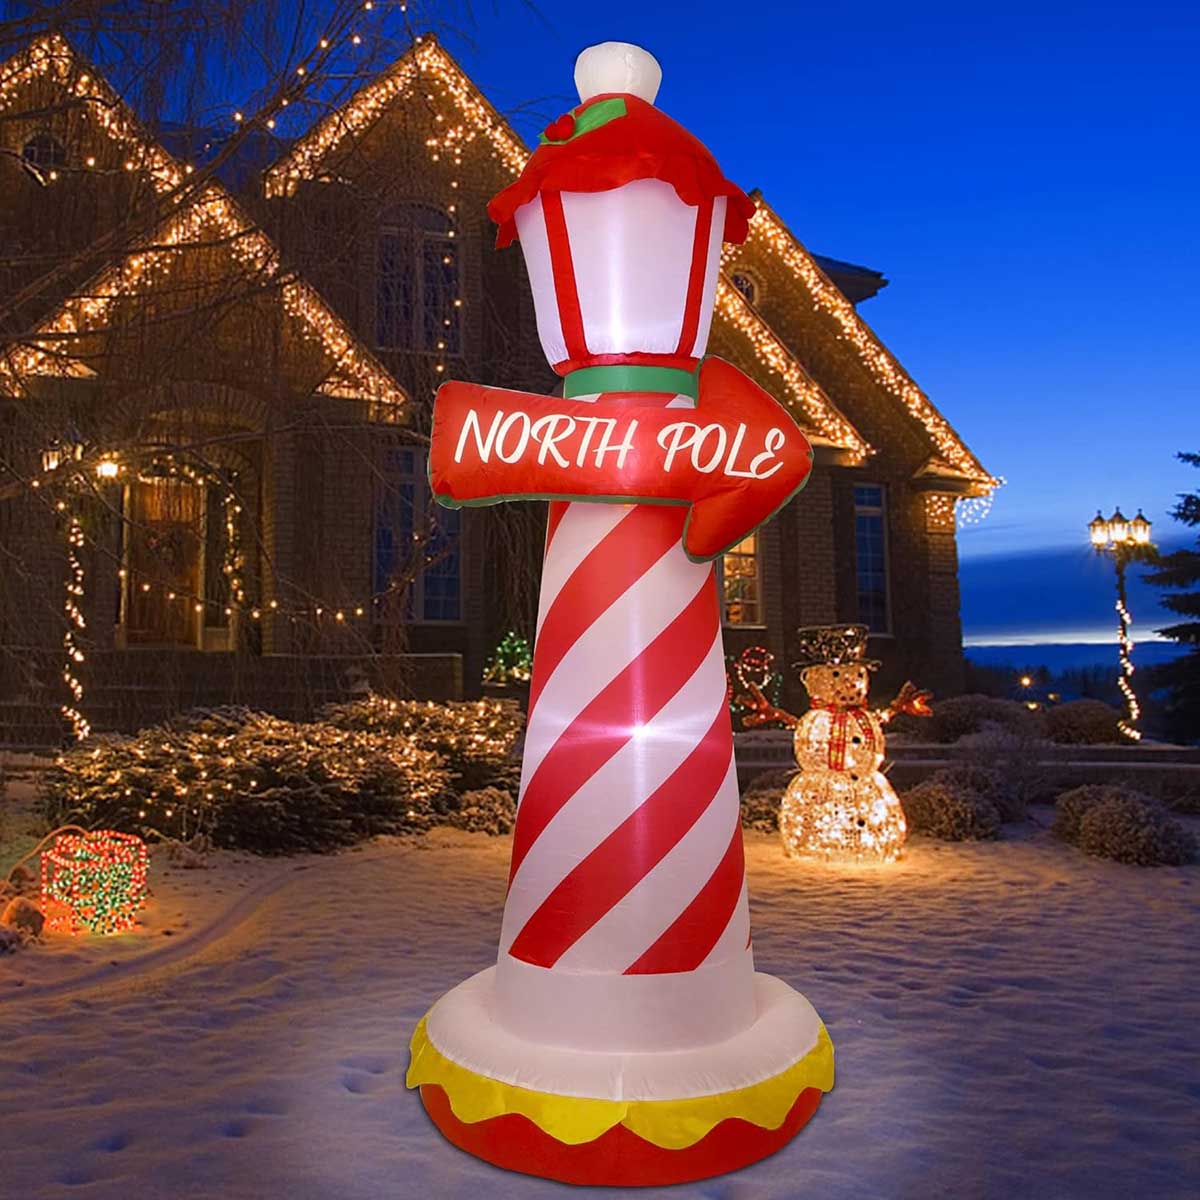 The Best Christmas Inflatables Option Blow-Up North Pole Sign with Built-In LED Lights